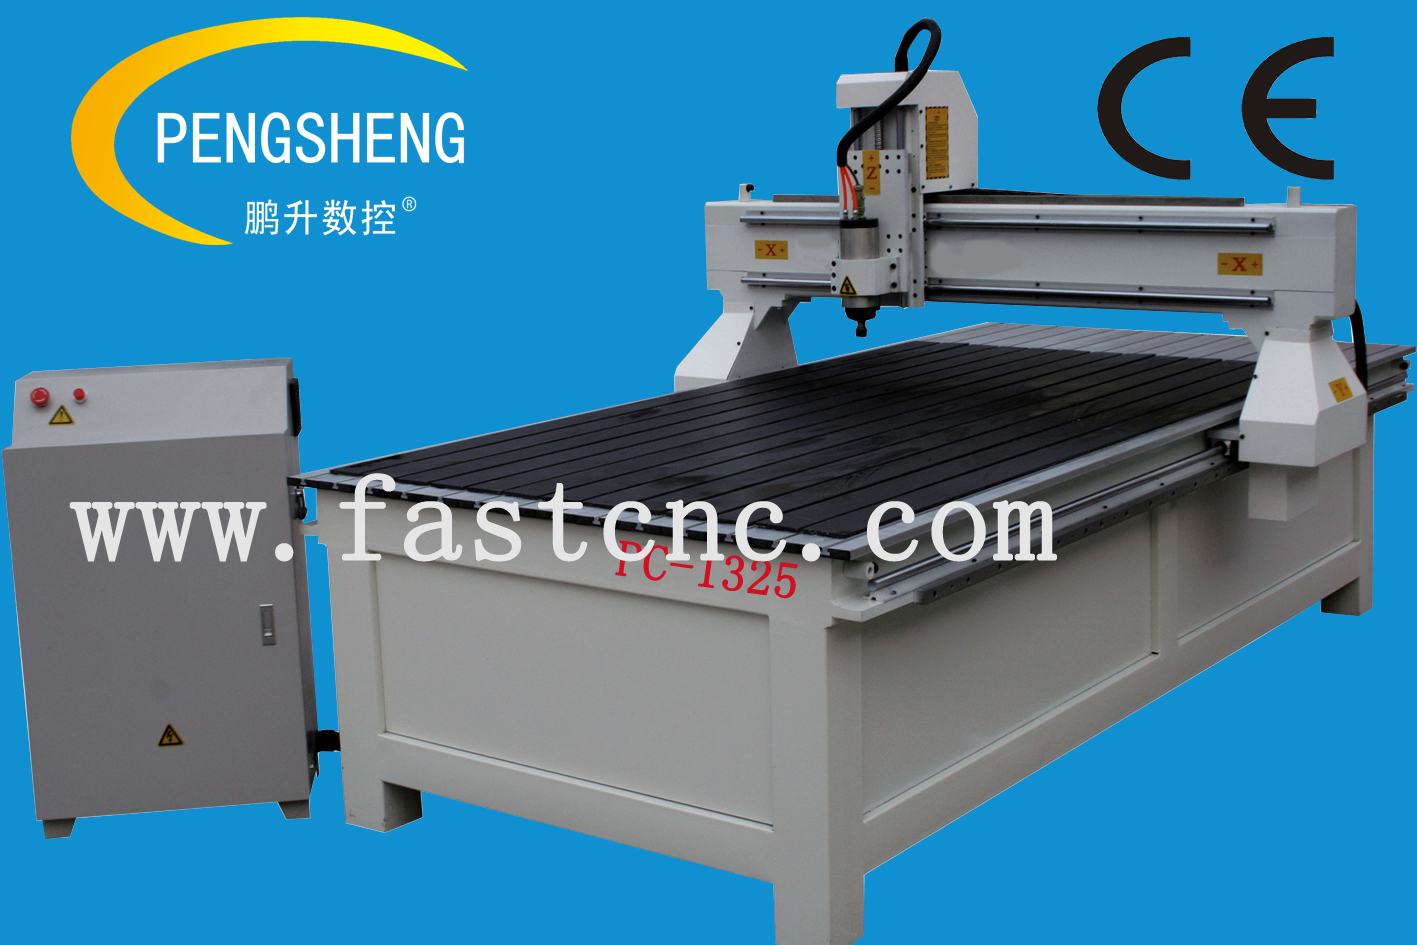 Hot sale!!!! advertising cnc router PC-1325 C type